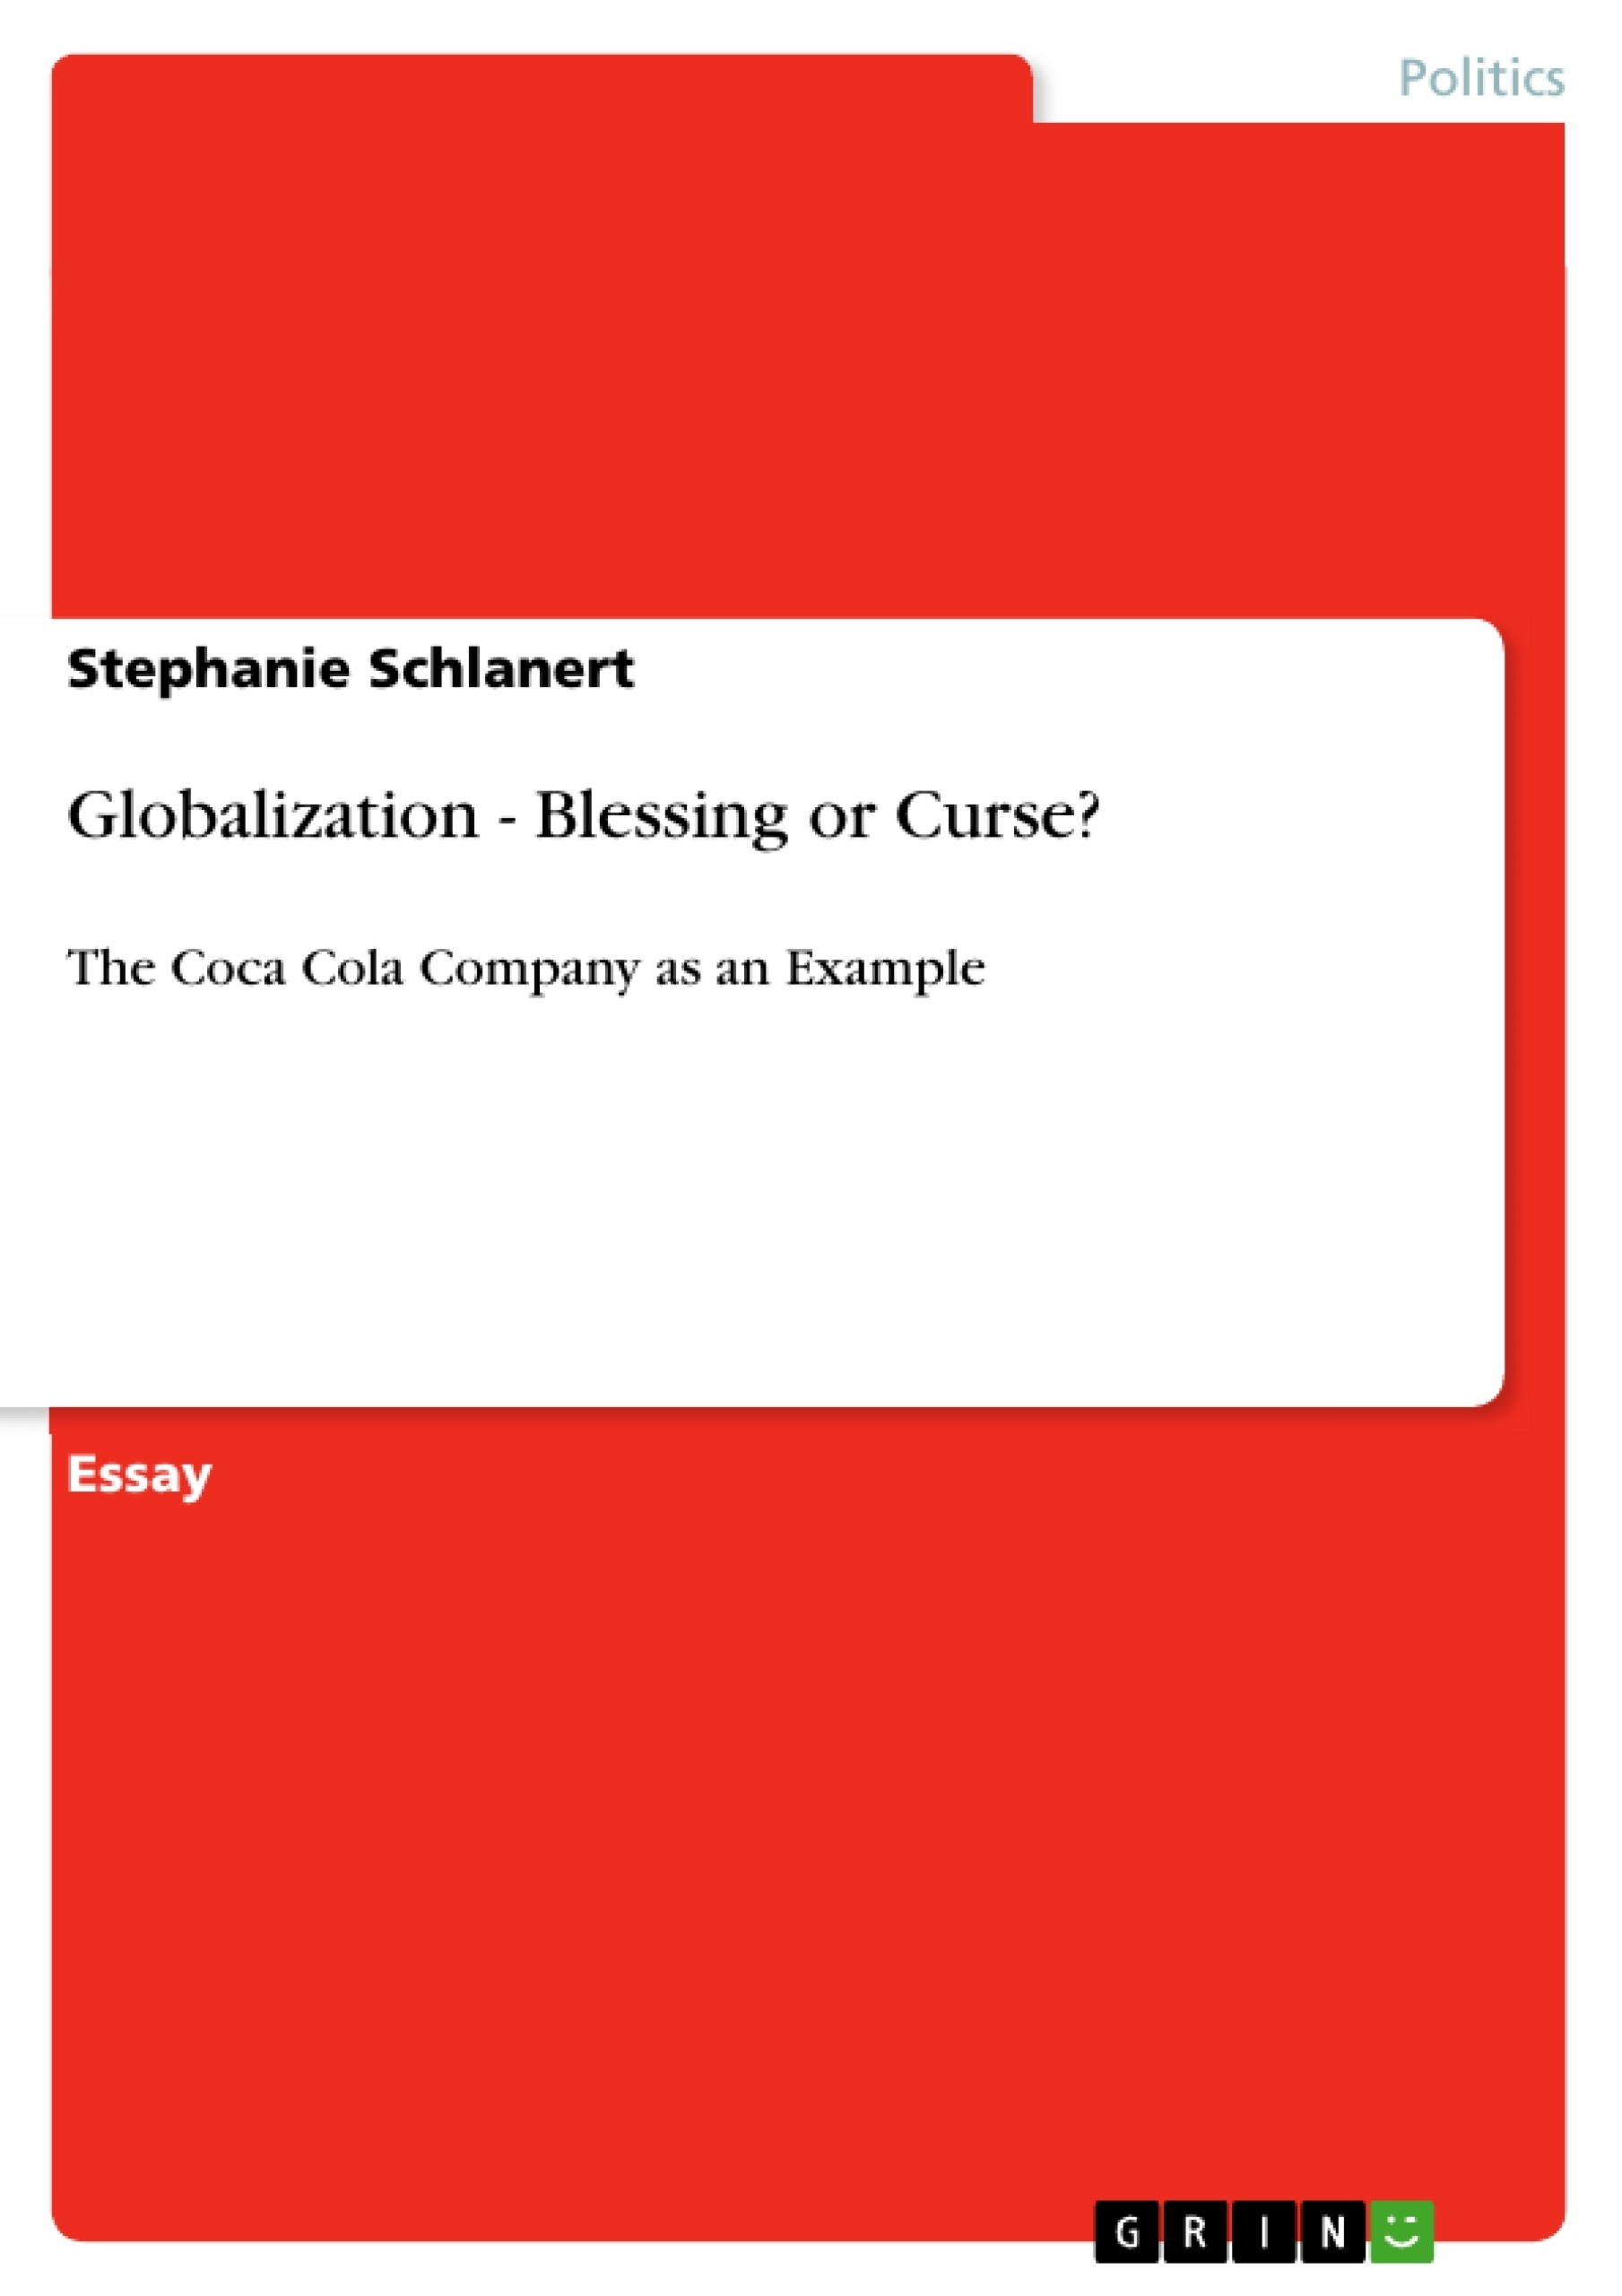 Title: Globalization - Blessing or Curse?